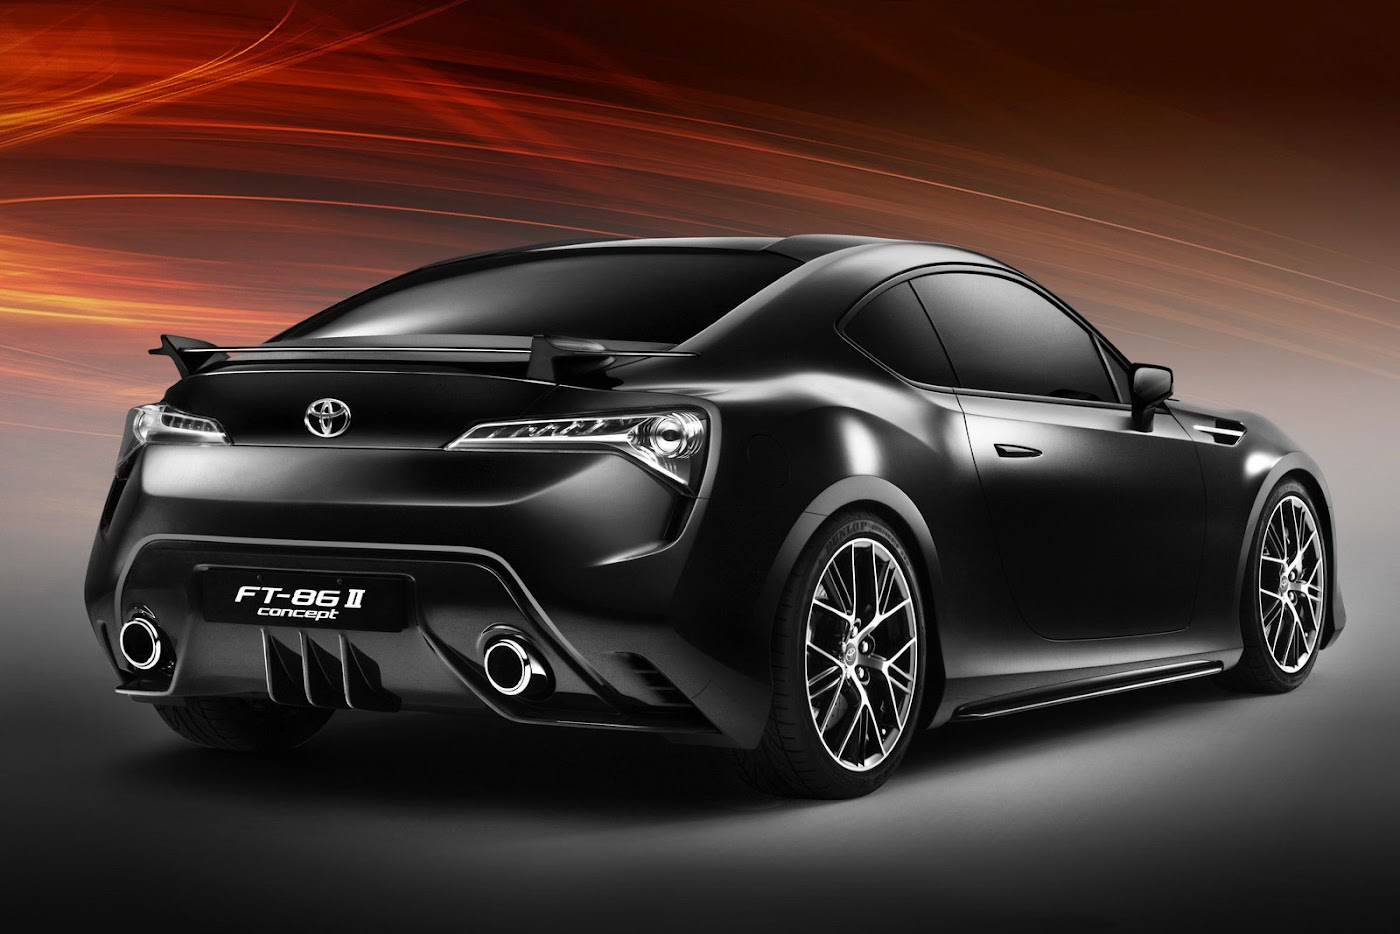 TOYOTA FT-86 SPORTS COUPE CONCEPT